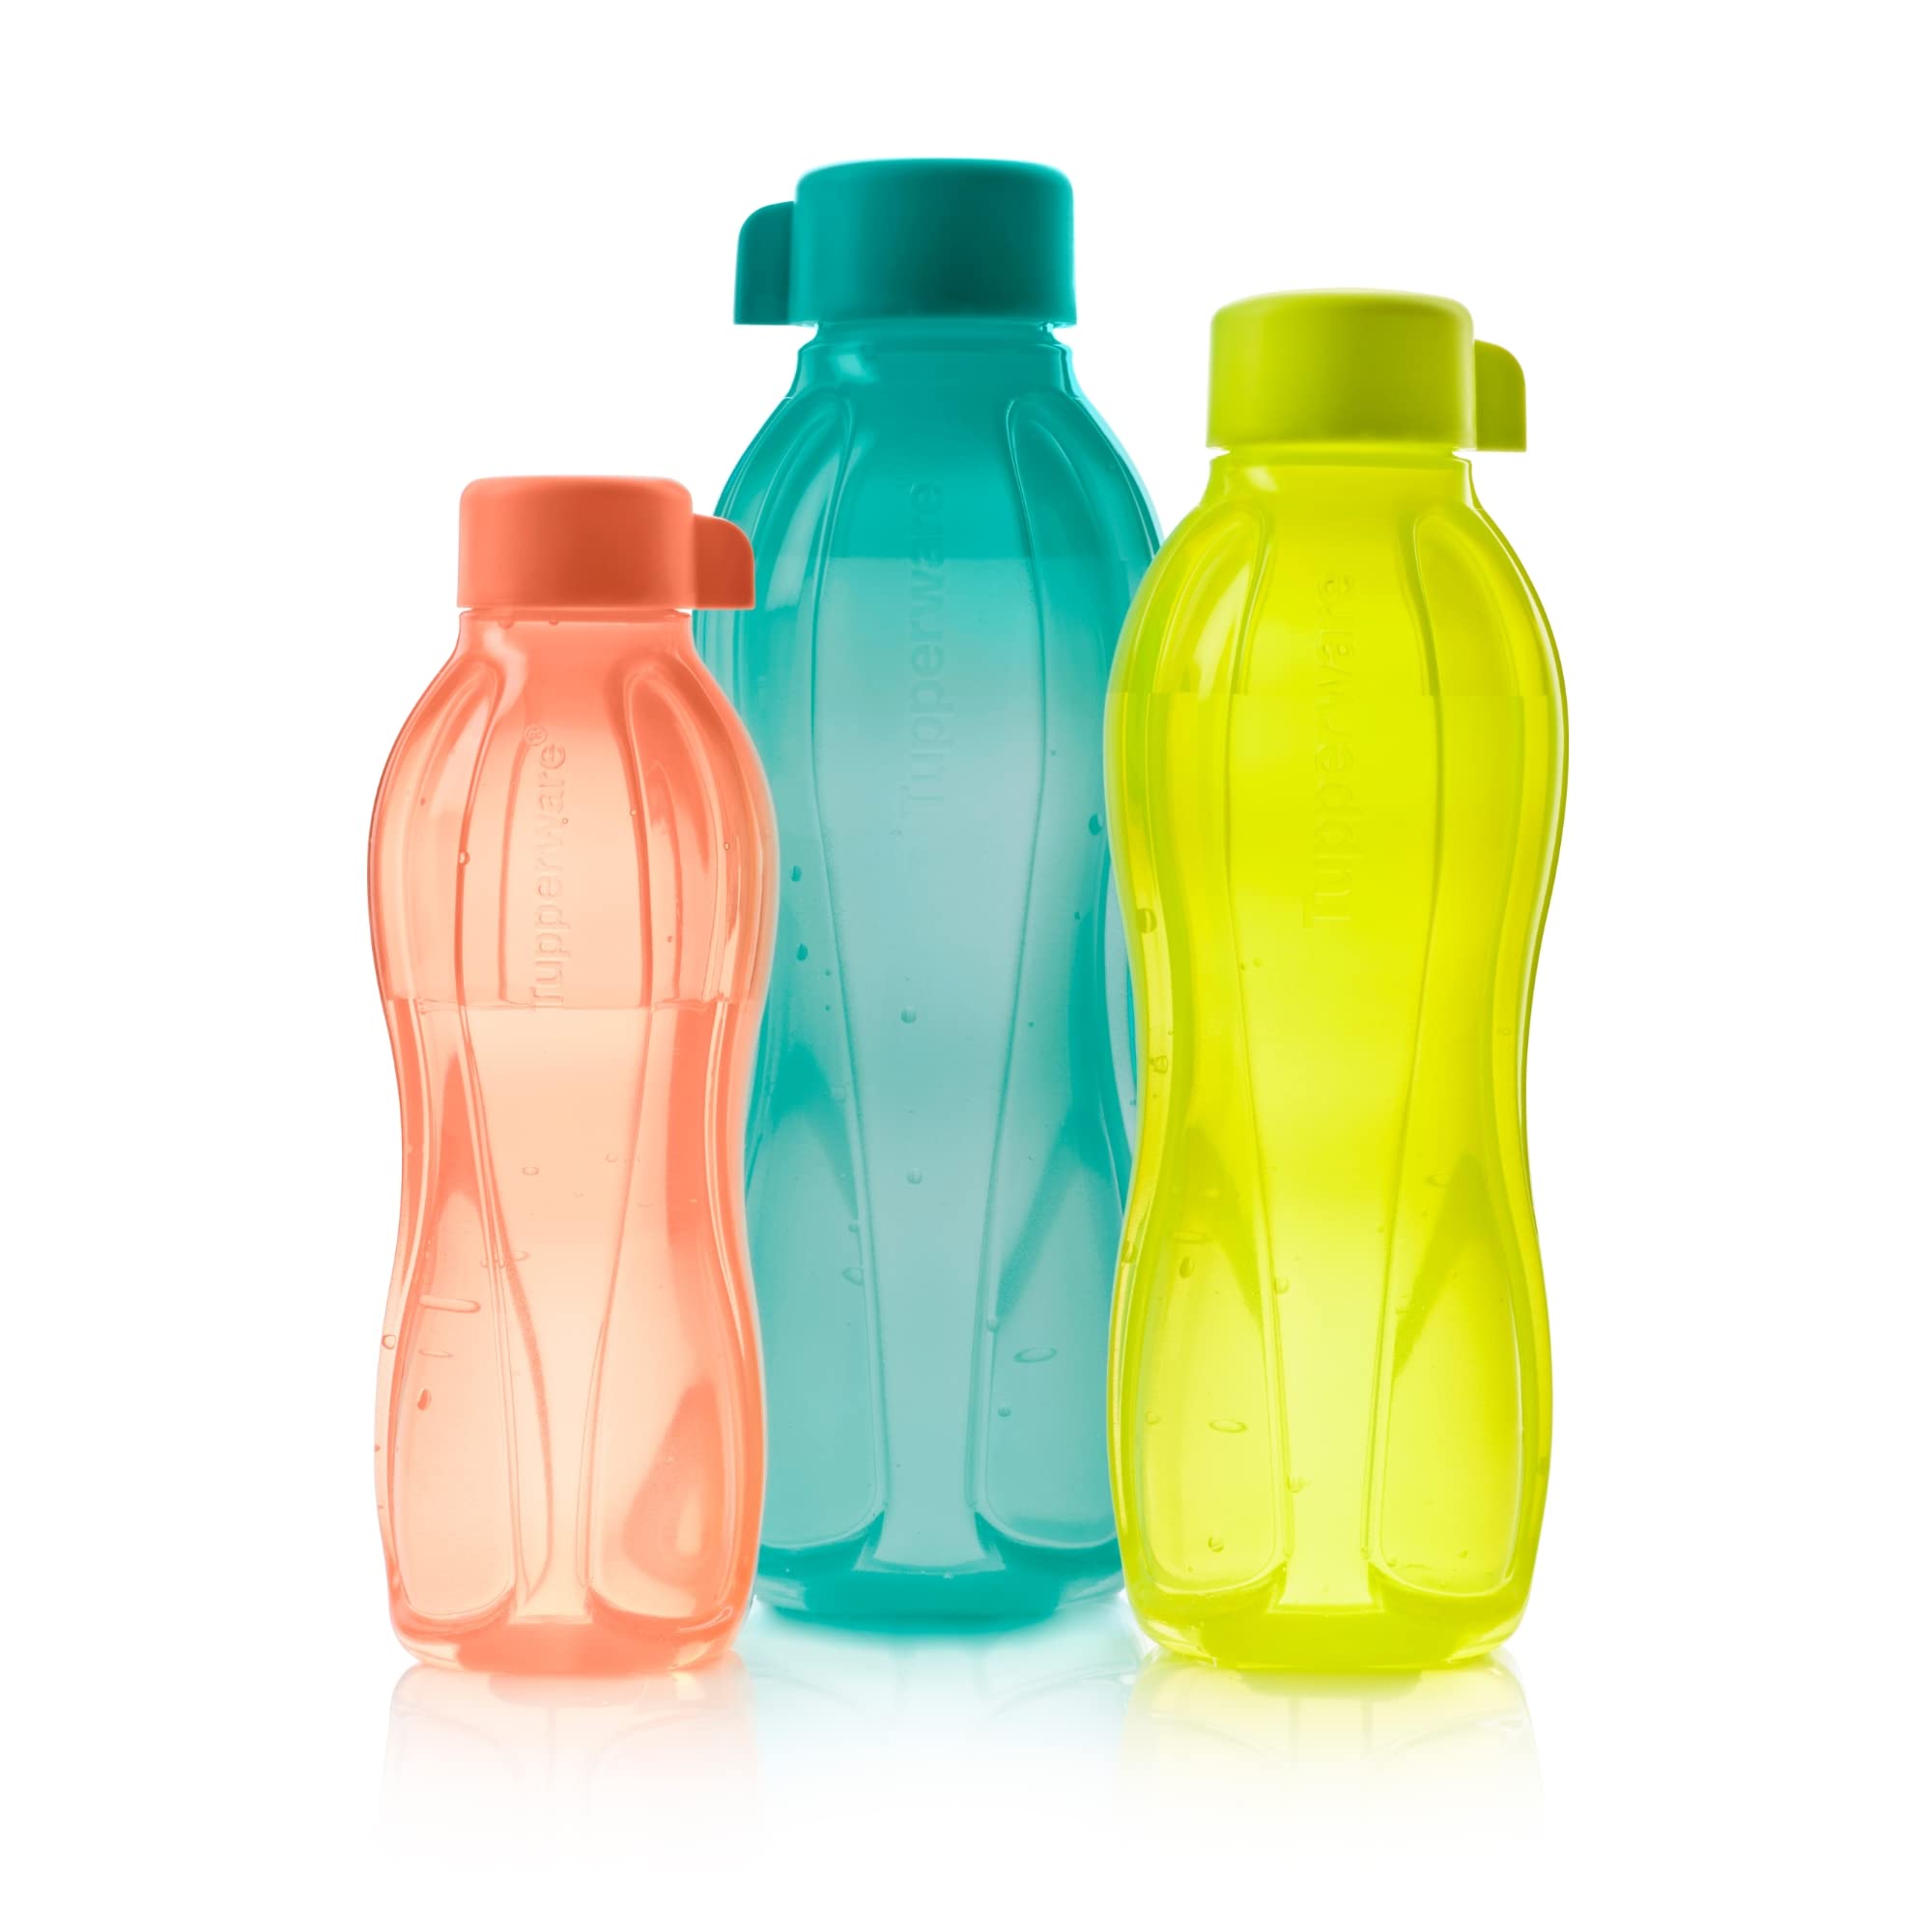 Tupperware Brand Eco+ Reusable Water Bottle Multipack - Includes 500mL  750mL & 1L Sizes - Dishwasher Safe & BPA Free - Lightweight & Leak Proof  Combo (500 mL 750 mL 1 L)